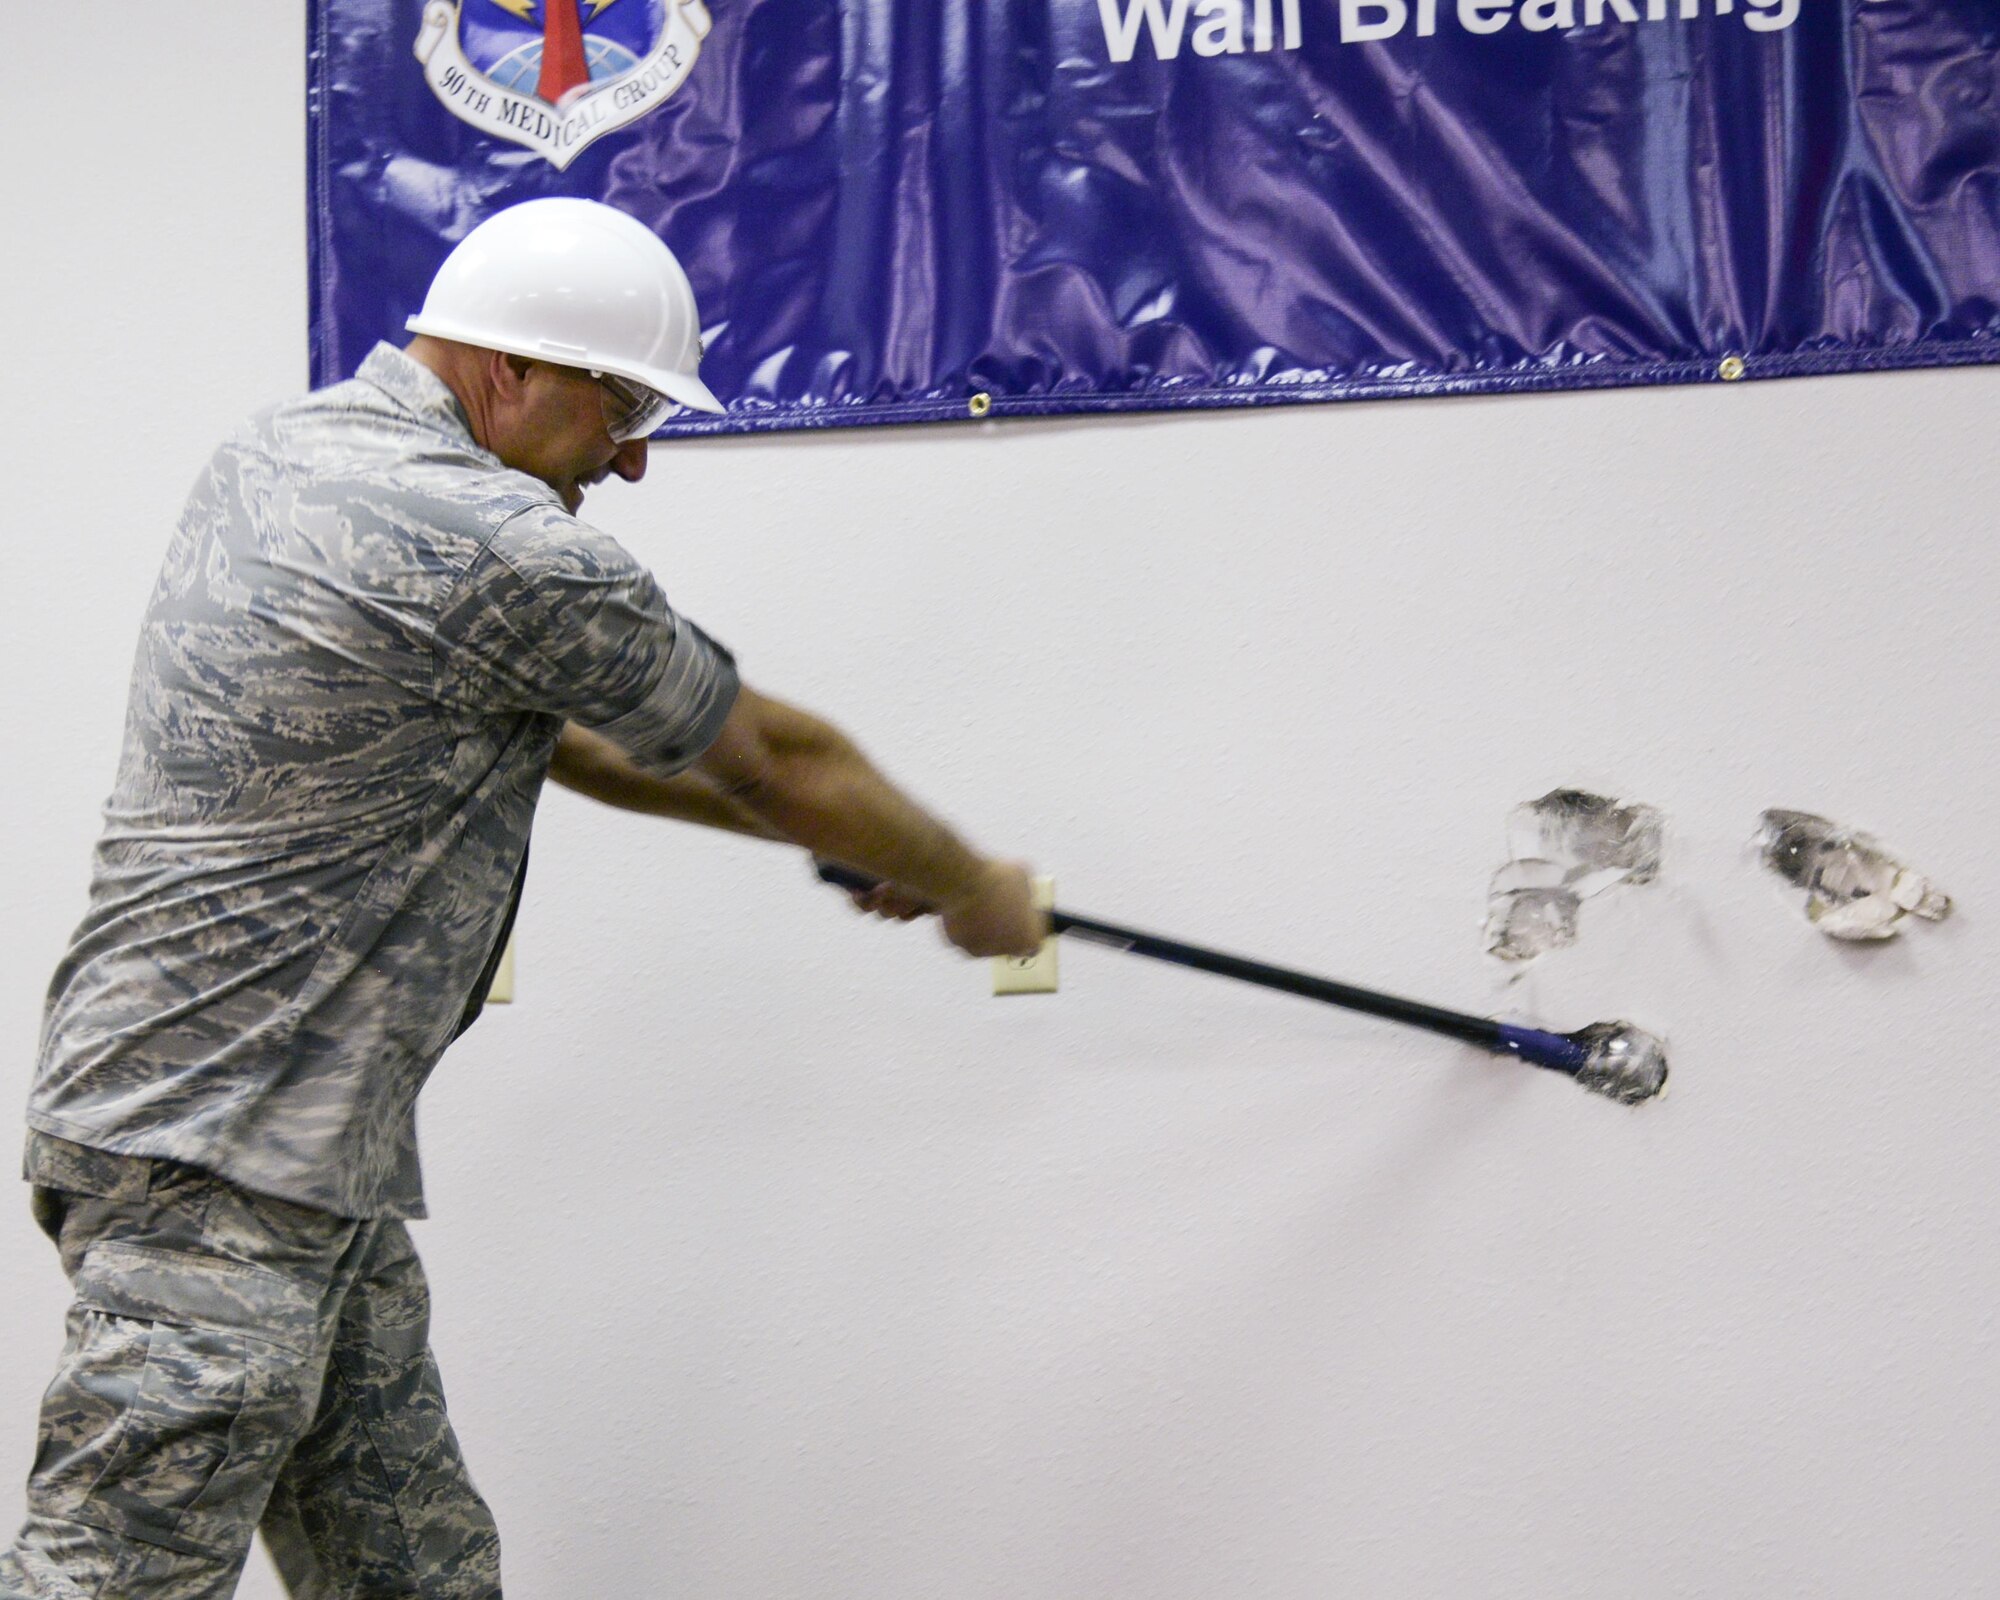 Col. Stephen Kravitsky, 90th Missile Wing commander, takes a sledgehammer to a wall in the 90th Medical Group Medical Treatment Facility during a ceremony Jan. 19, 2015, on F.E. Warren Air Force Base, Wyo. Construction to expand the MTF is scheduled to begin in February, creating a more patient-friendly and efficient atmosphere. (U.S. Air Force photo by Airman 1st Class Malcolm Mayfield)